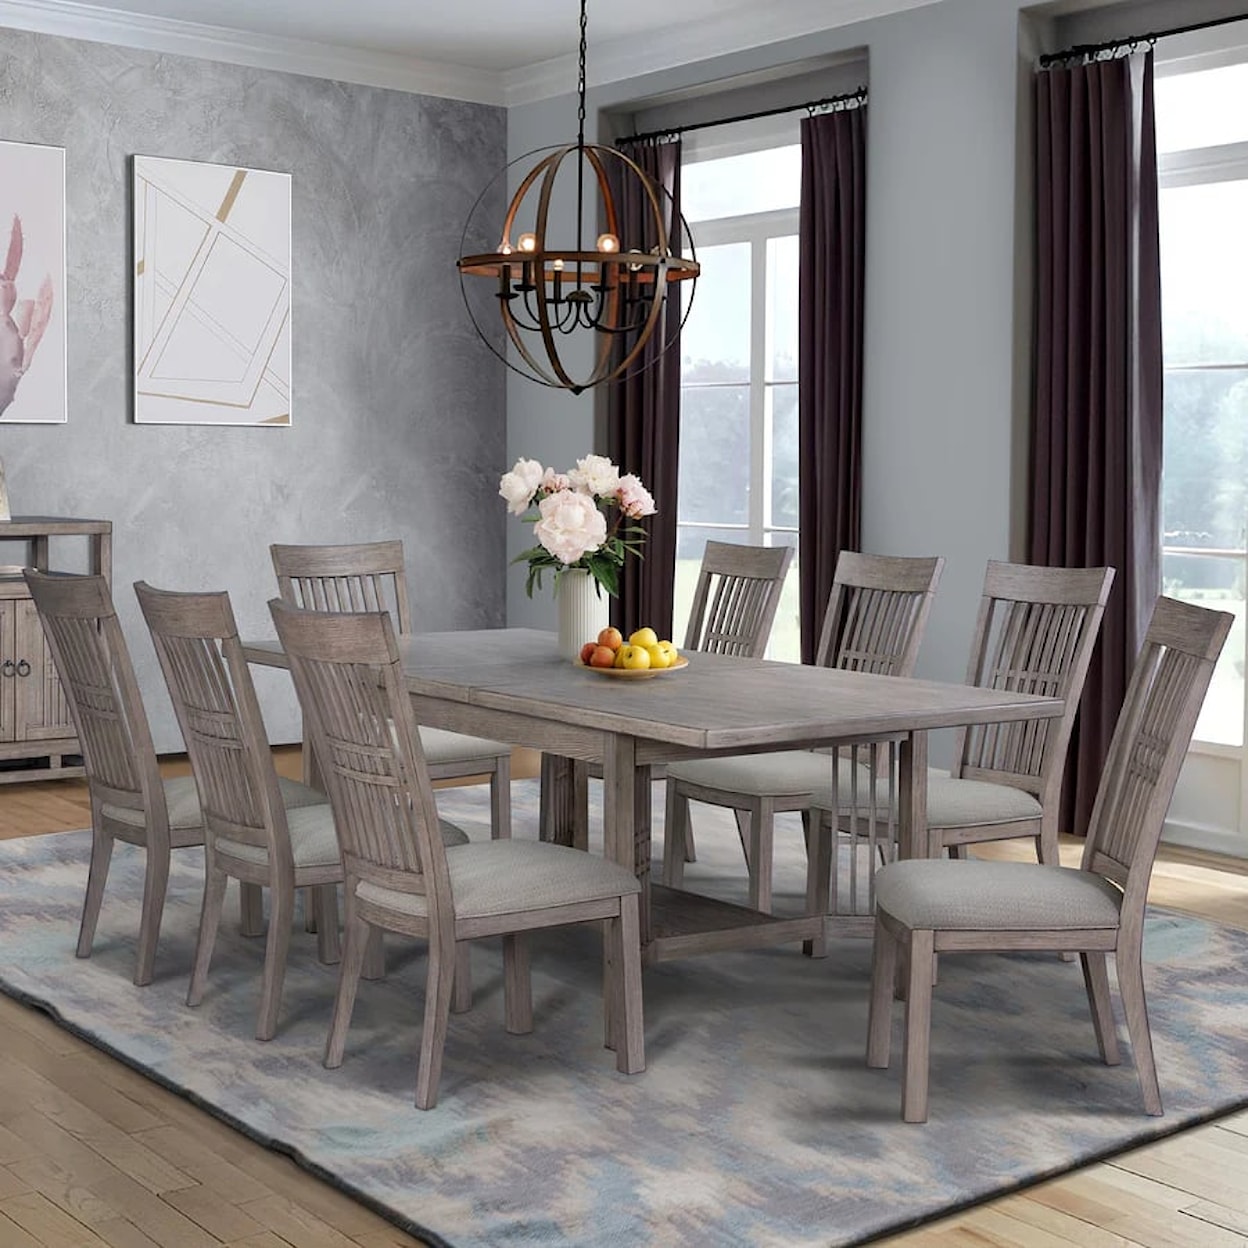 Legends Furniture Fusion Dining Table